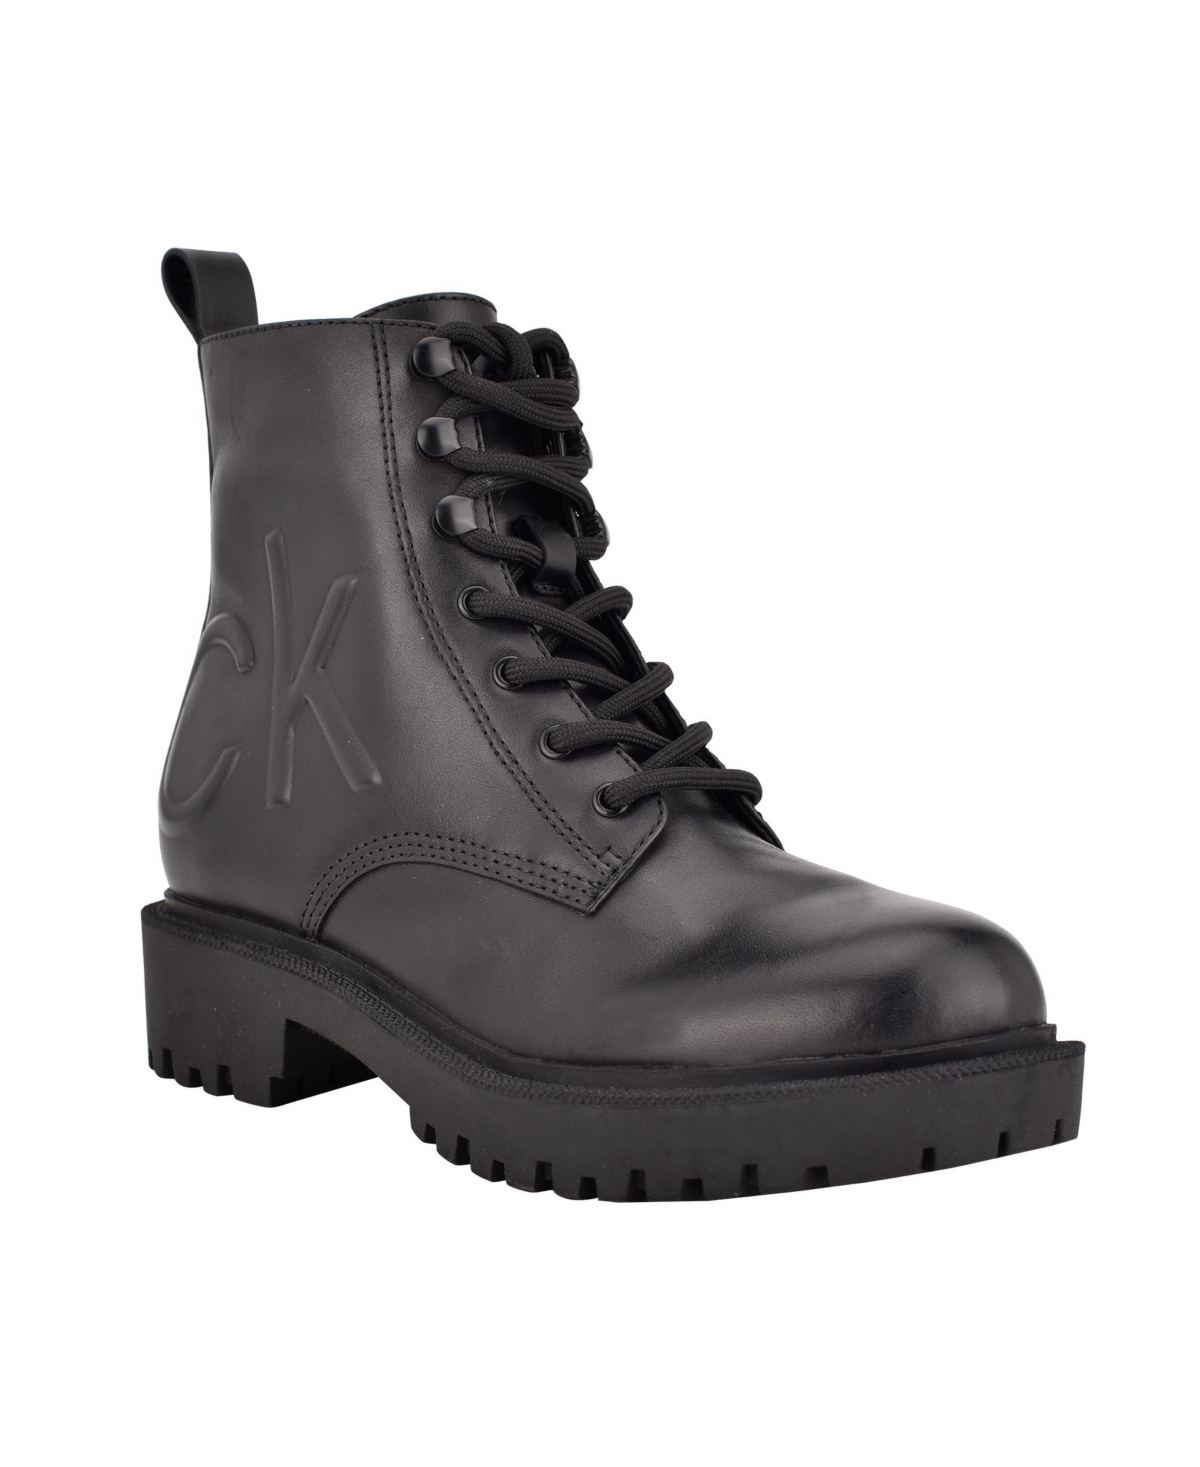 UPC 195972016002 product image for Calvin Klein Women's Kamry Lace Up Logo Lug Sole Combat Booties Women's Shoes | upcitemdb.com